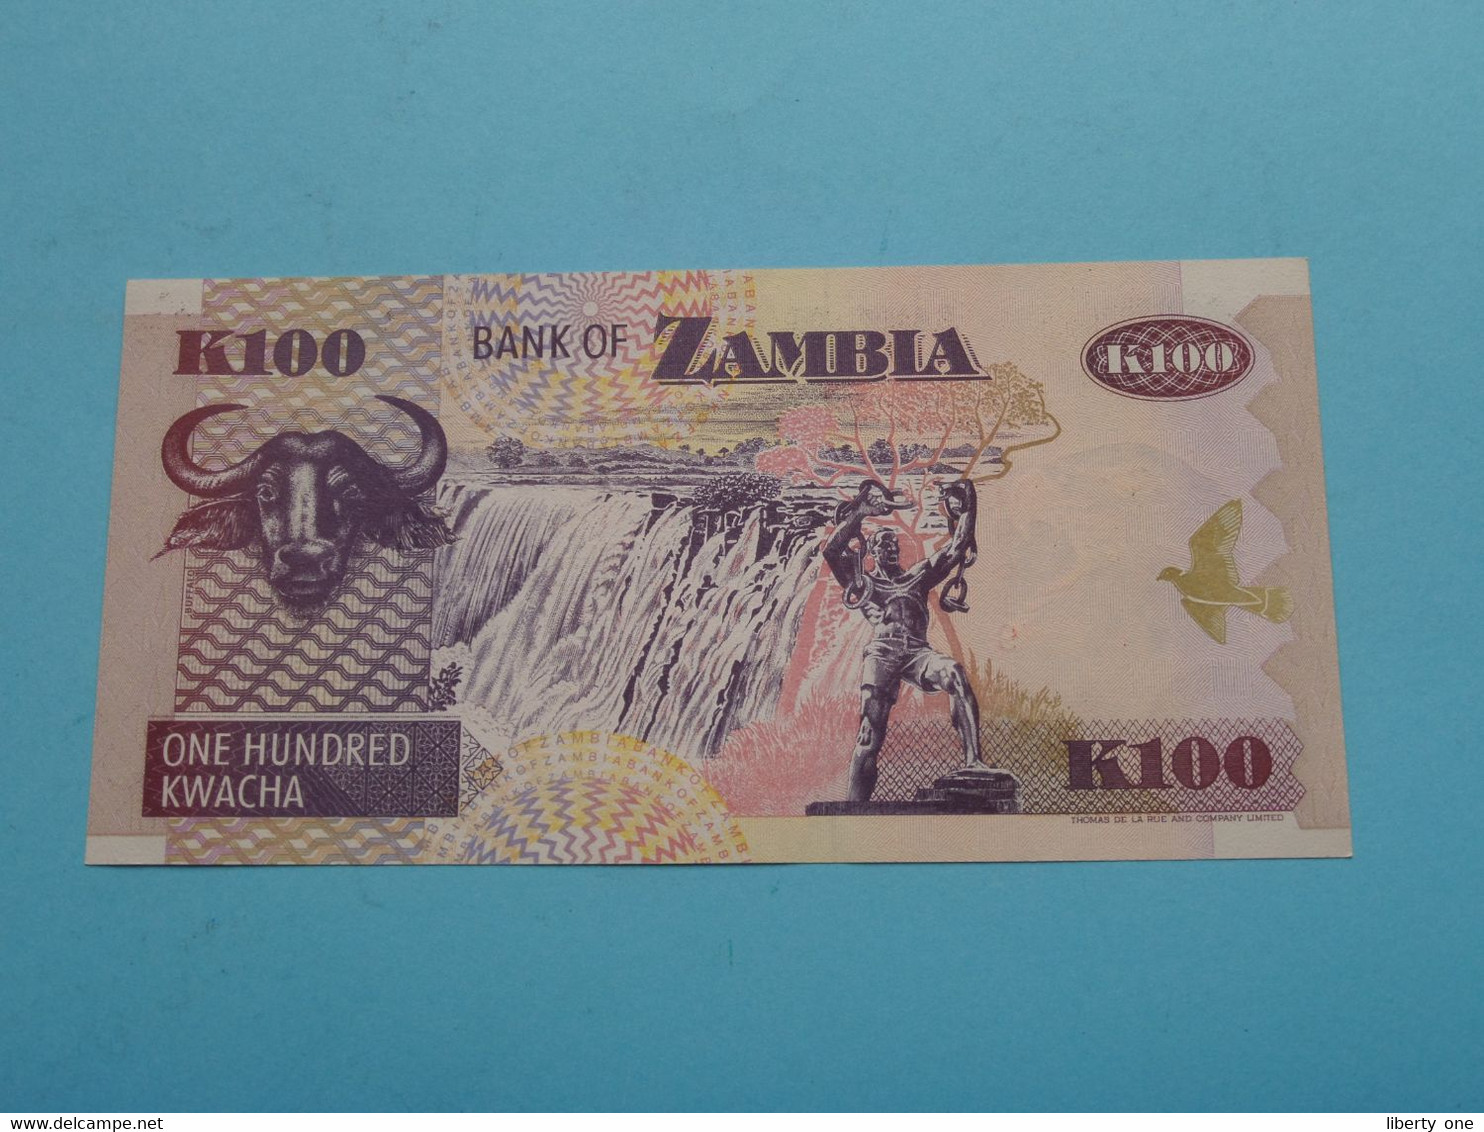 100 One Hundred KWACHA > Bank Of ZAMBIA 1992 ( C/M5149619 ) ( For Grade, Please See Photo ) UNC ! - Sambia